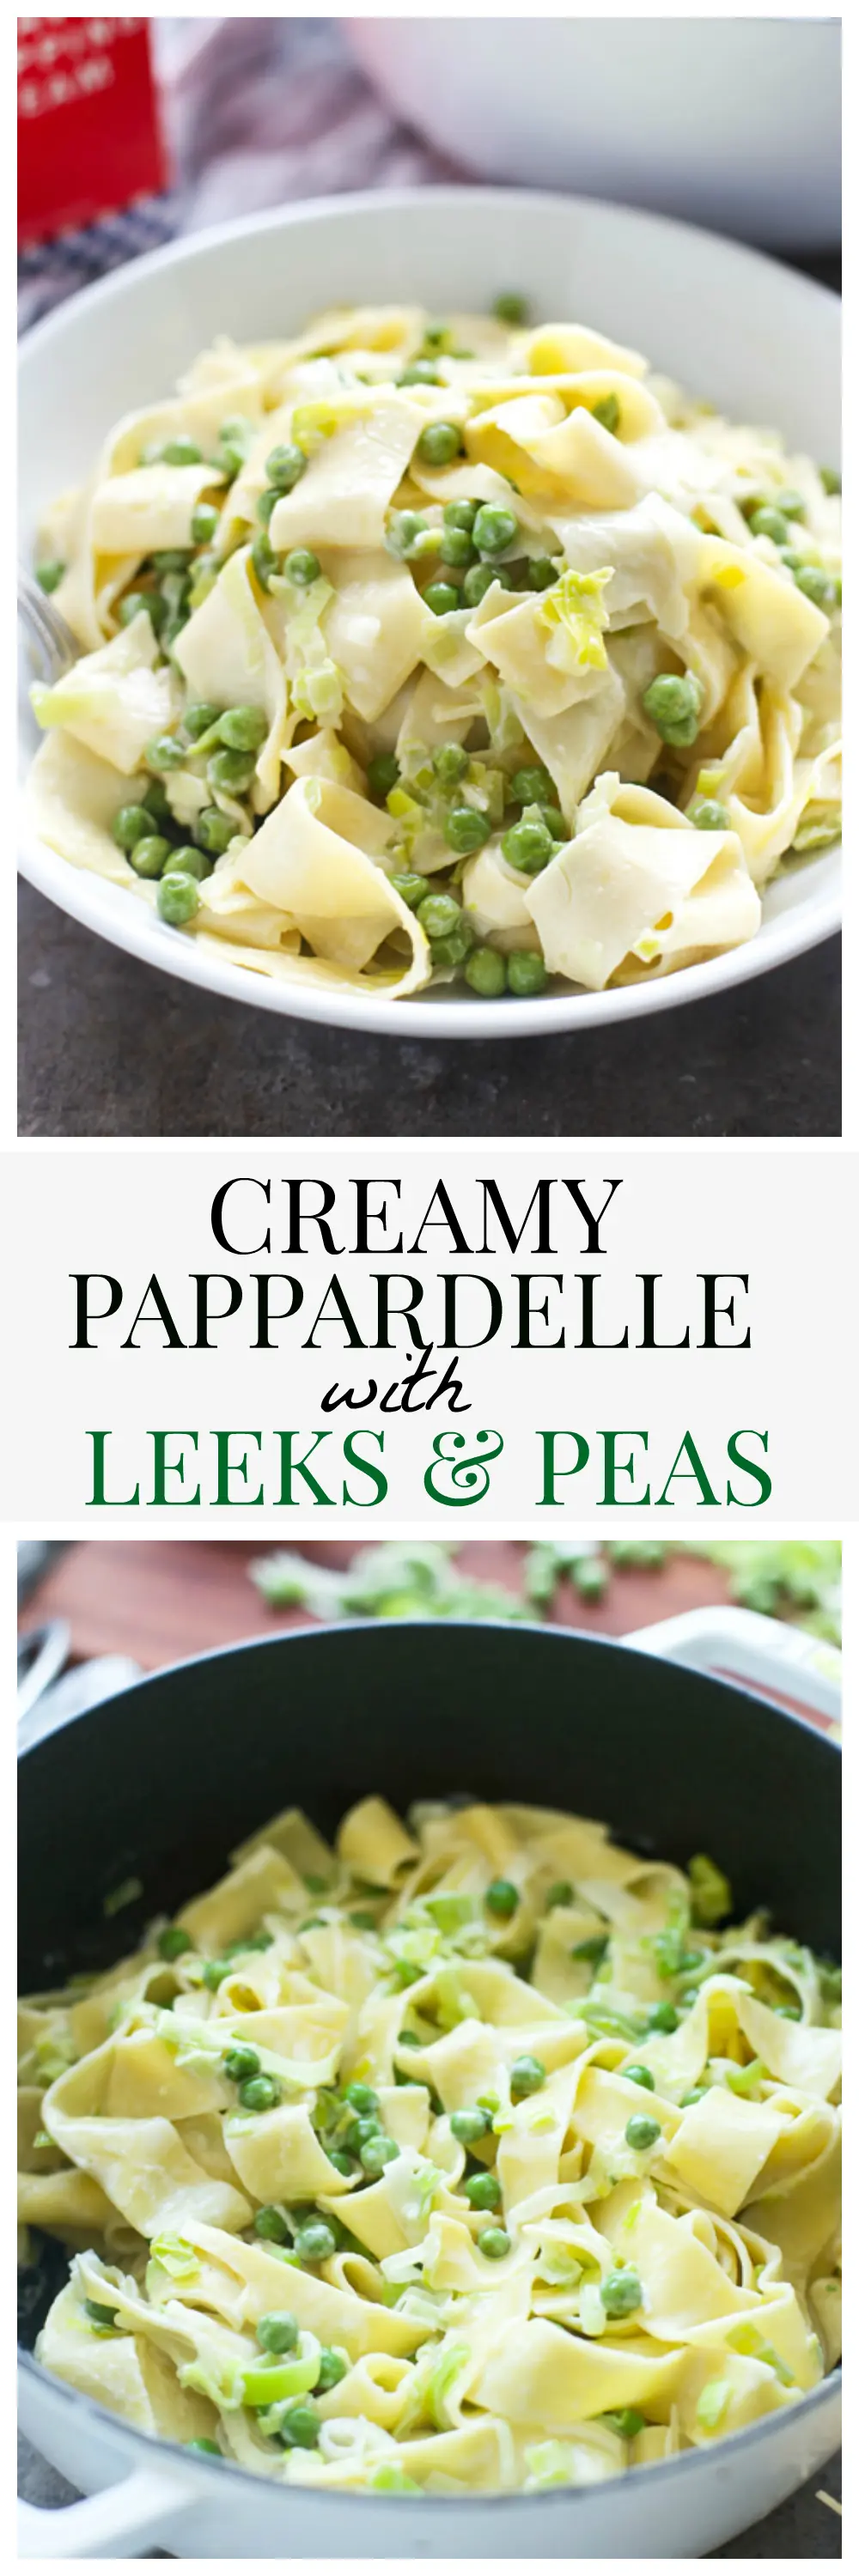 Creamy Papparadelle with Leeks and Peas